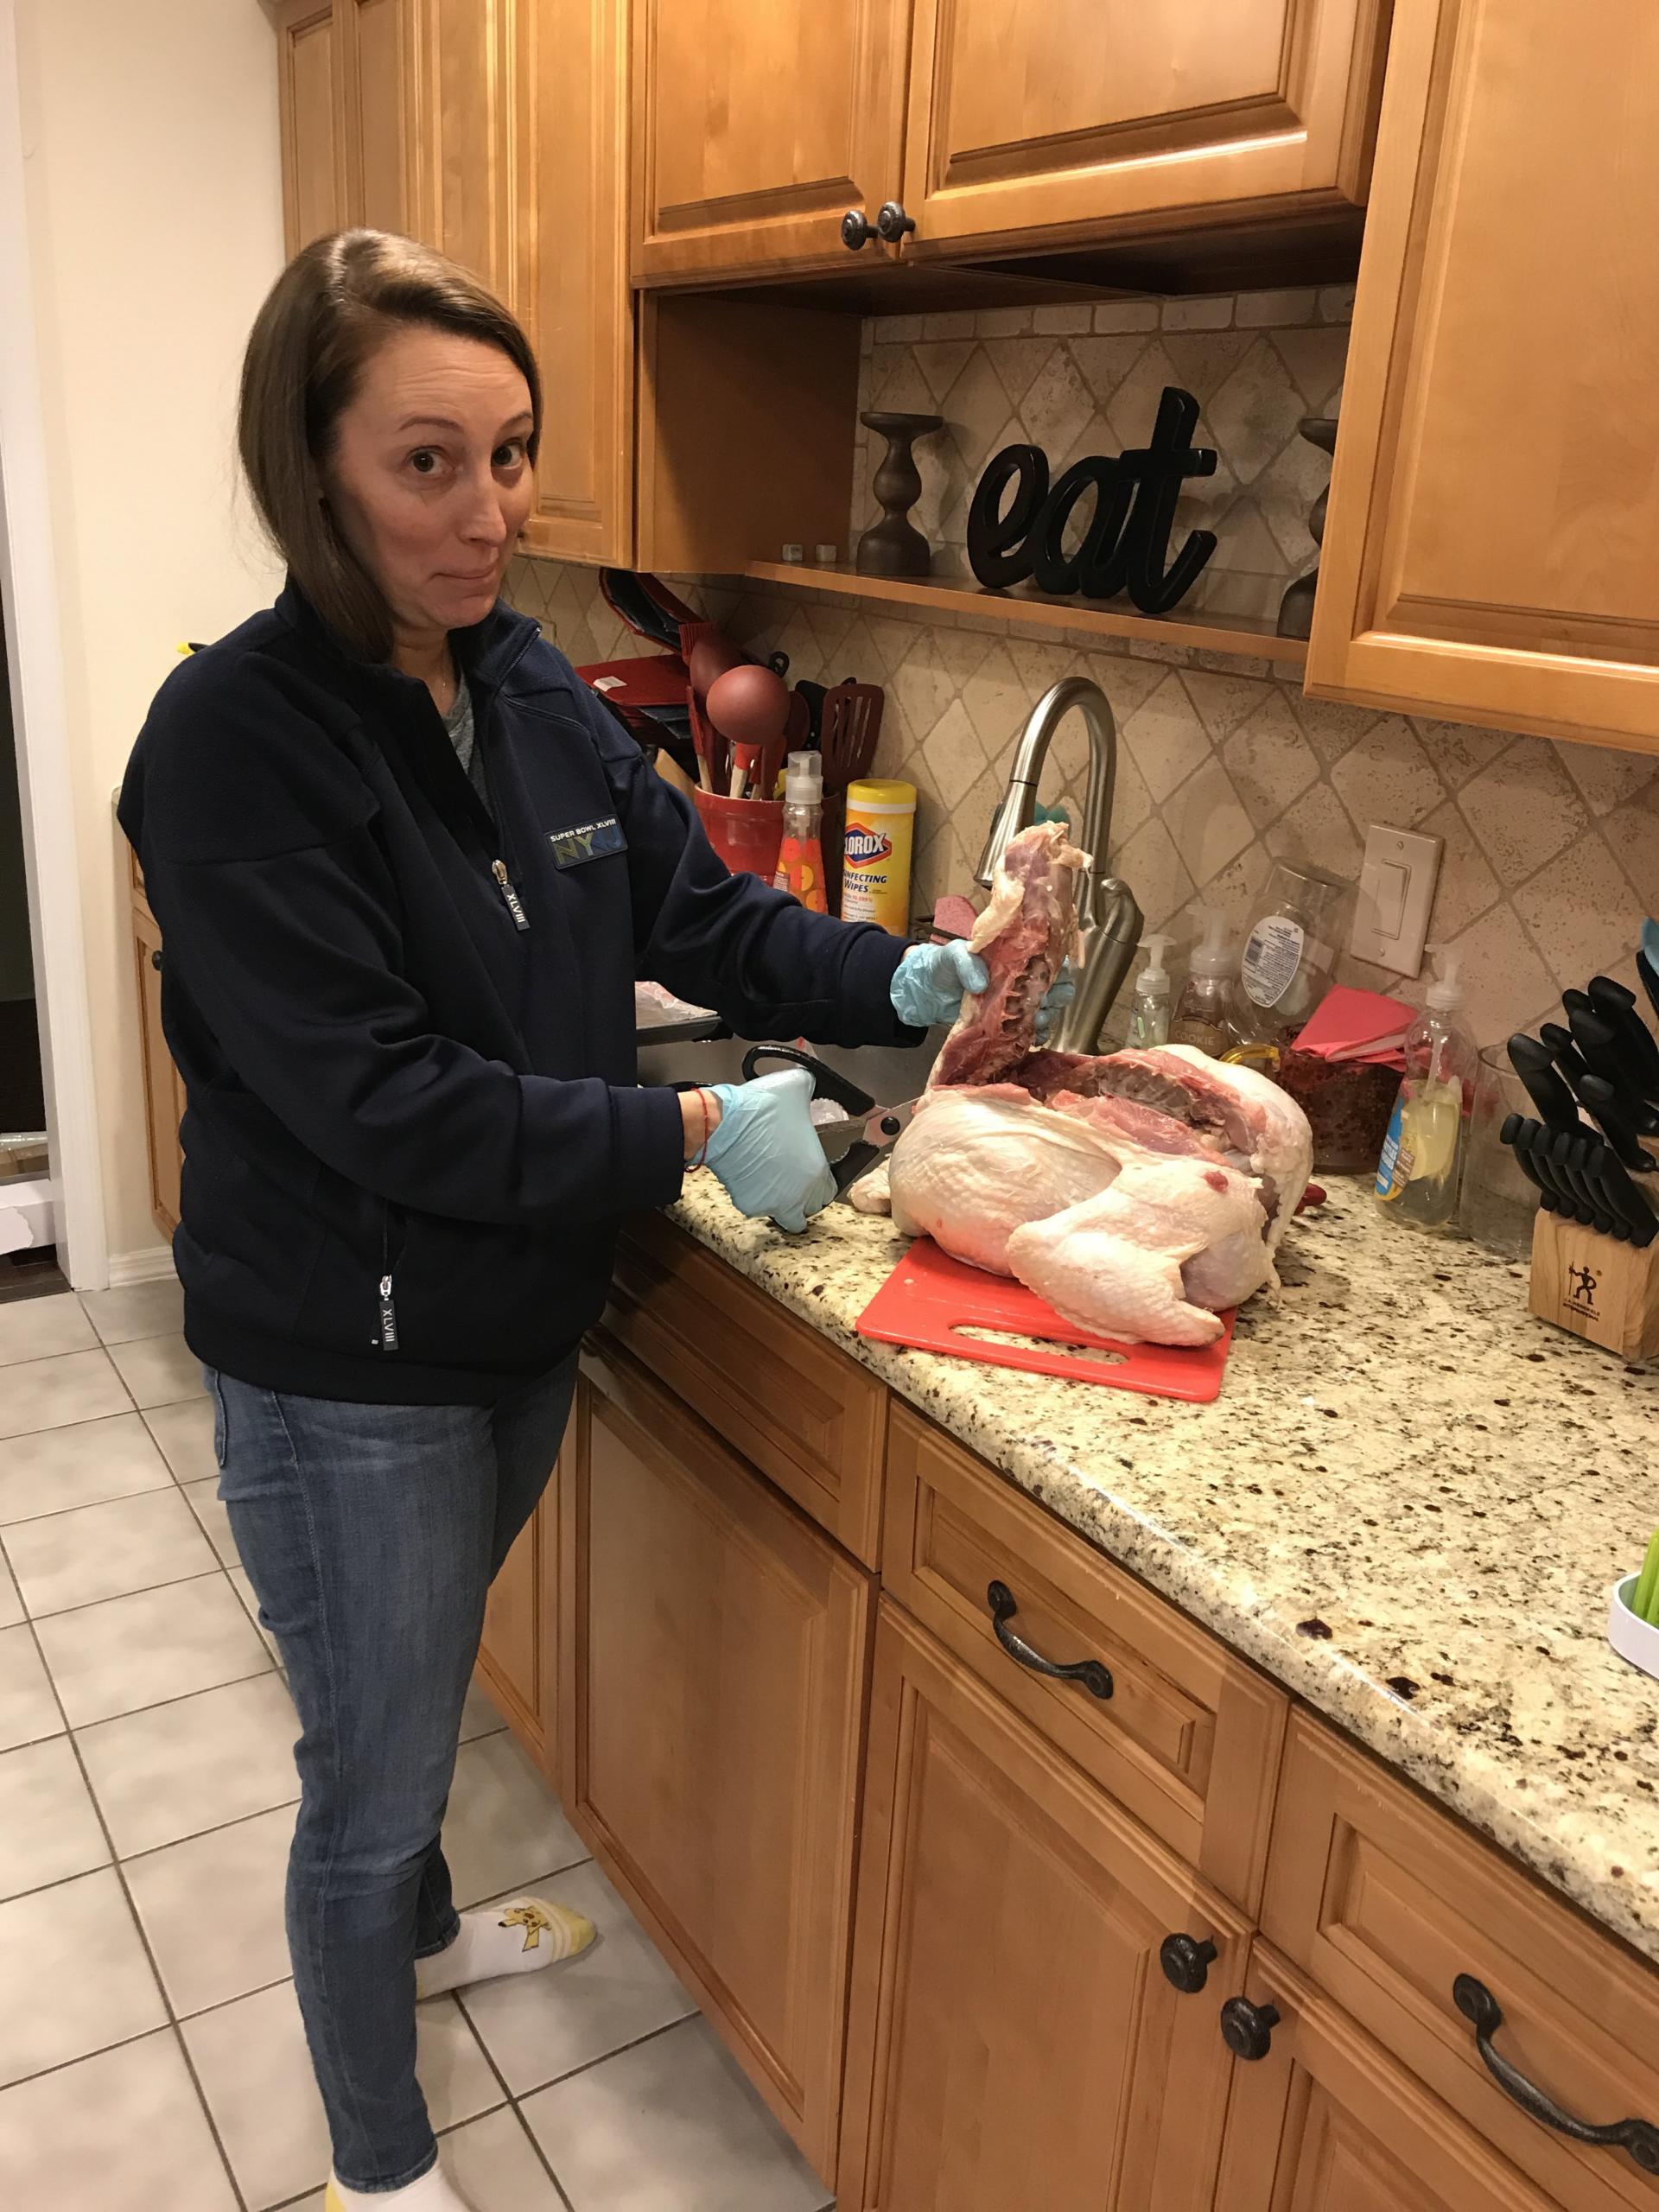 CELEBRATE: Friendsgiving and a Roasted Spatchcock Turkey by New Jersey foodie blogger What's For Dinner Esq.